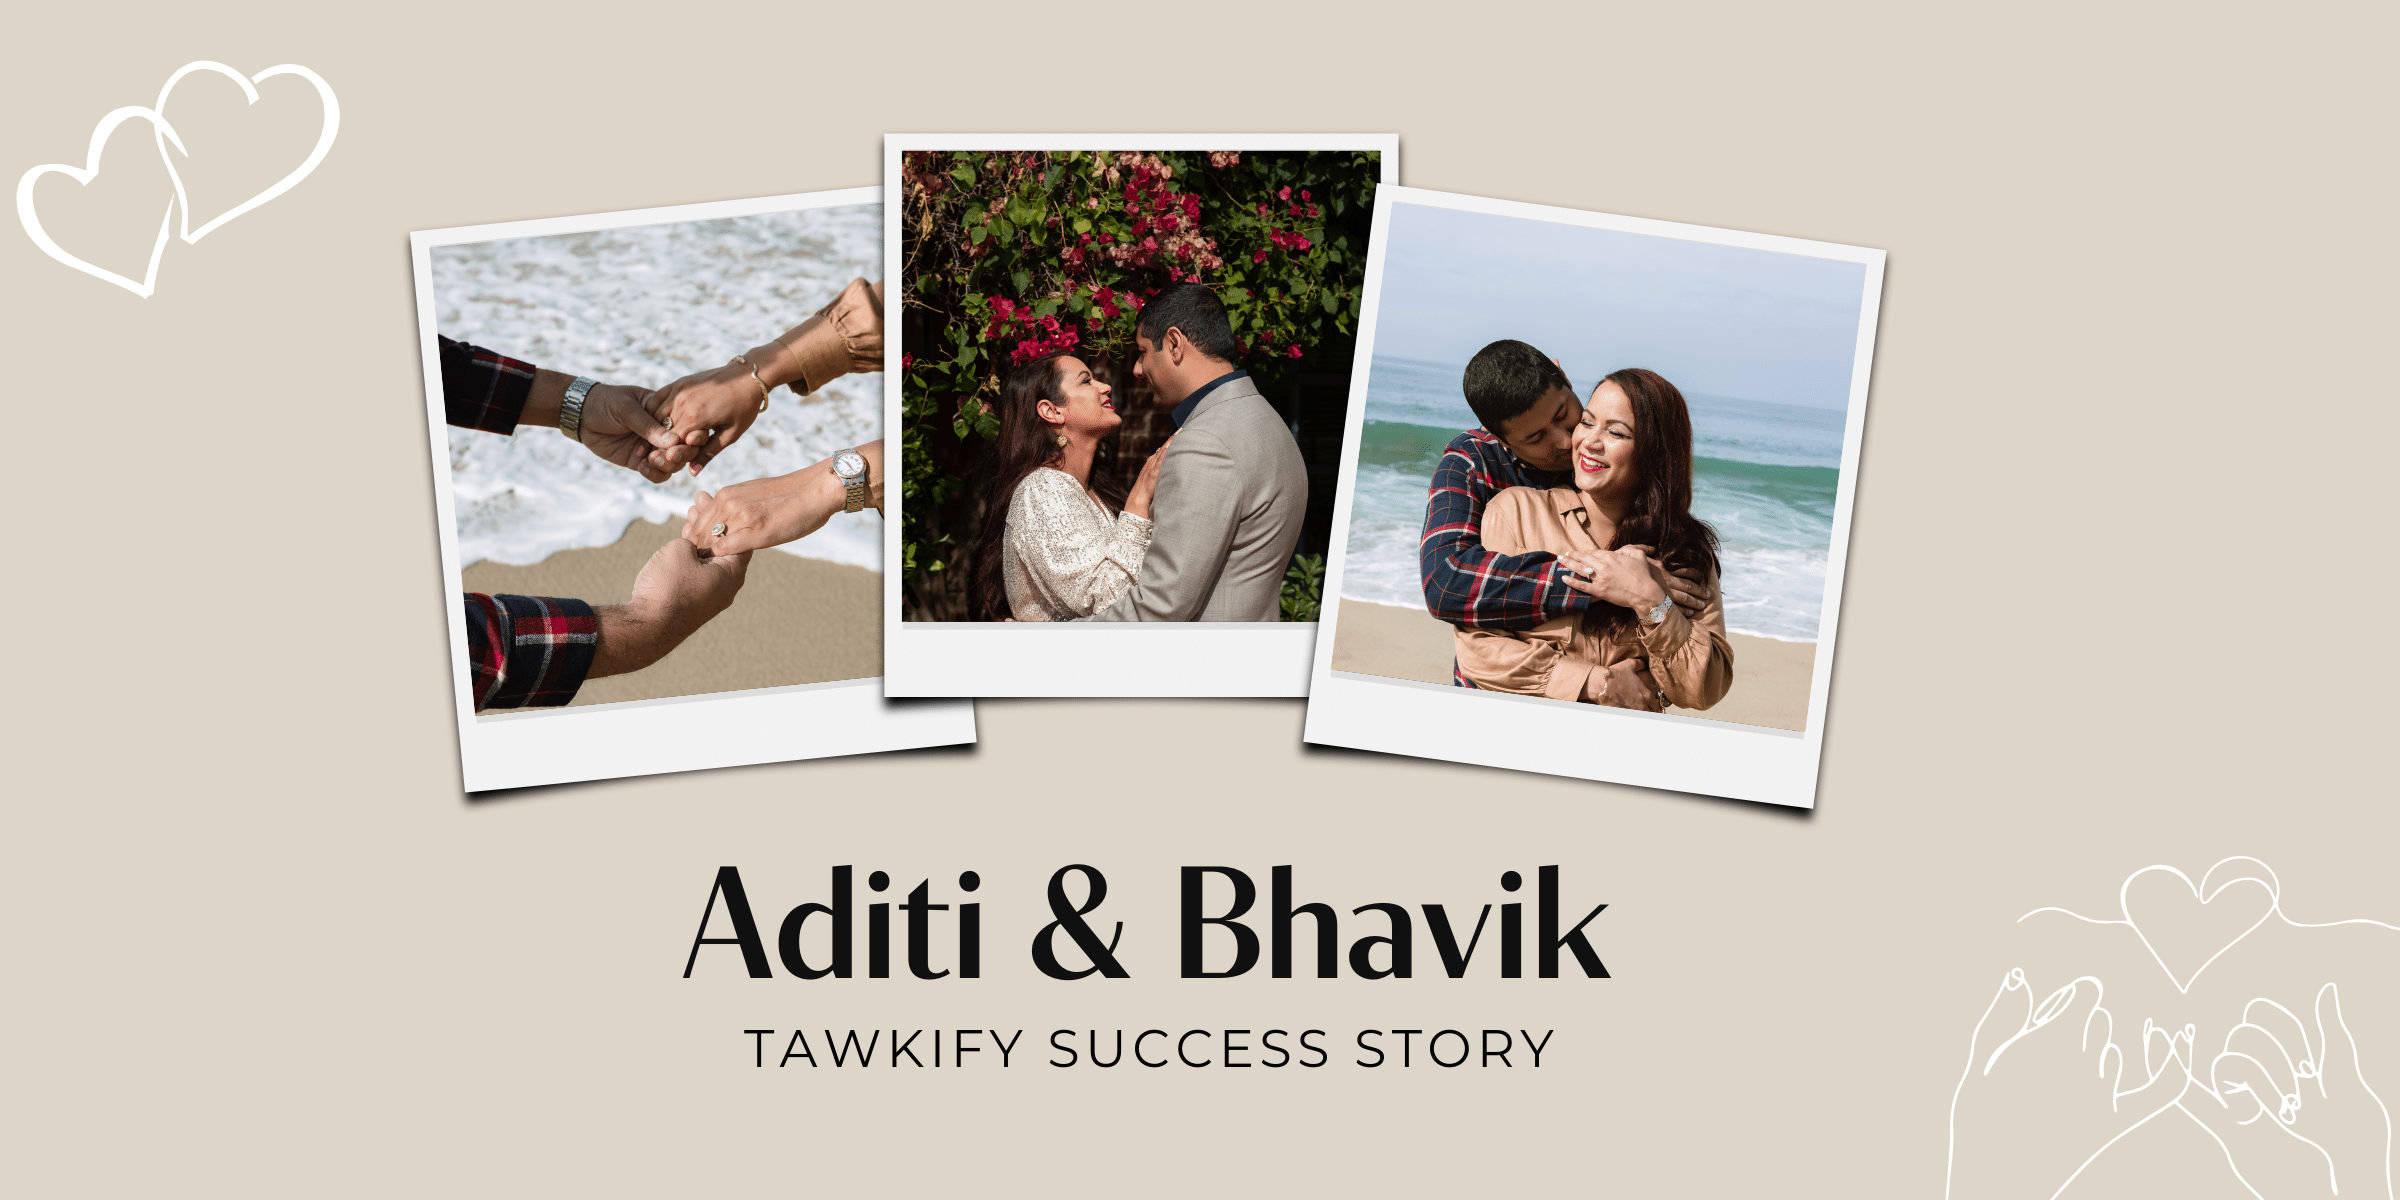 If you’re wondering about signing up for Tawkify, read this Tawkify success story. Learn how this real Tawkify couple experienced matchmaking success!